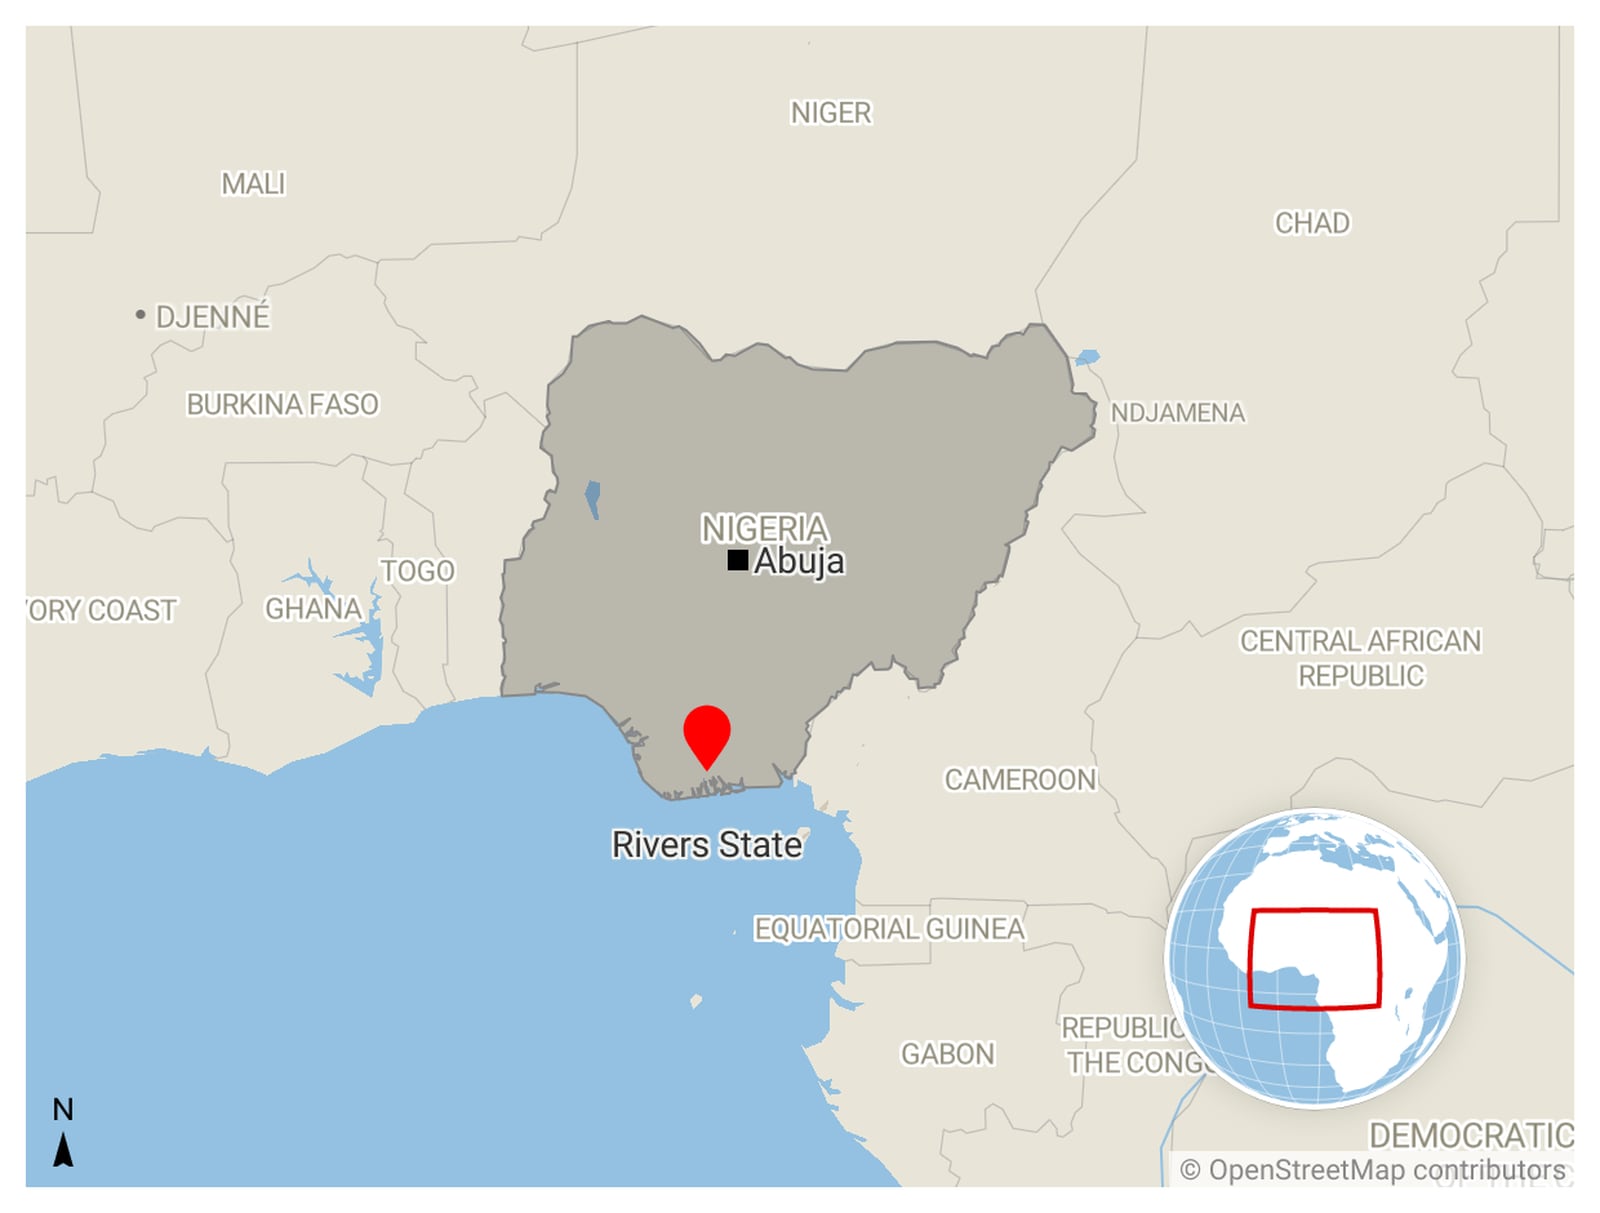 The incident happened in the south of Nigeria in Rivers State on Saturday. Map: Datawrapper